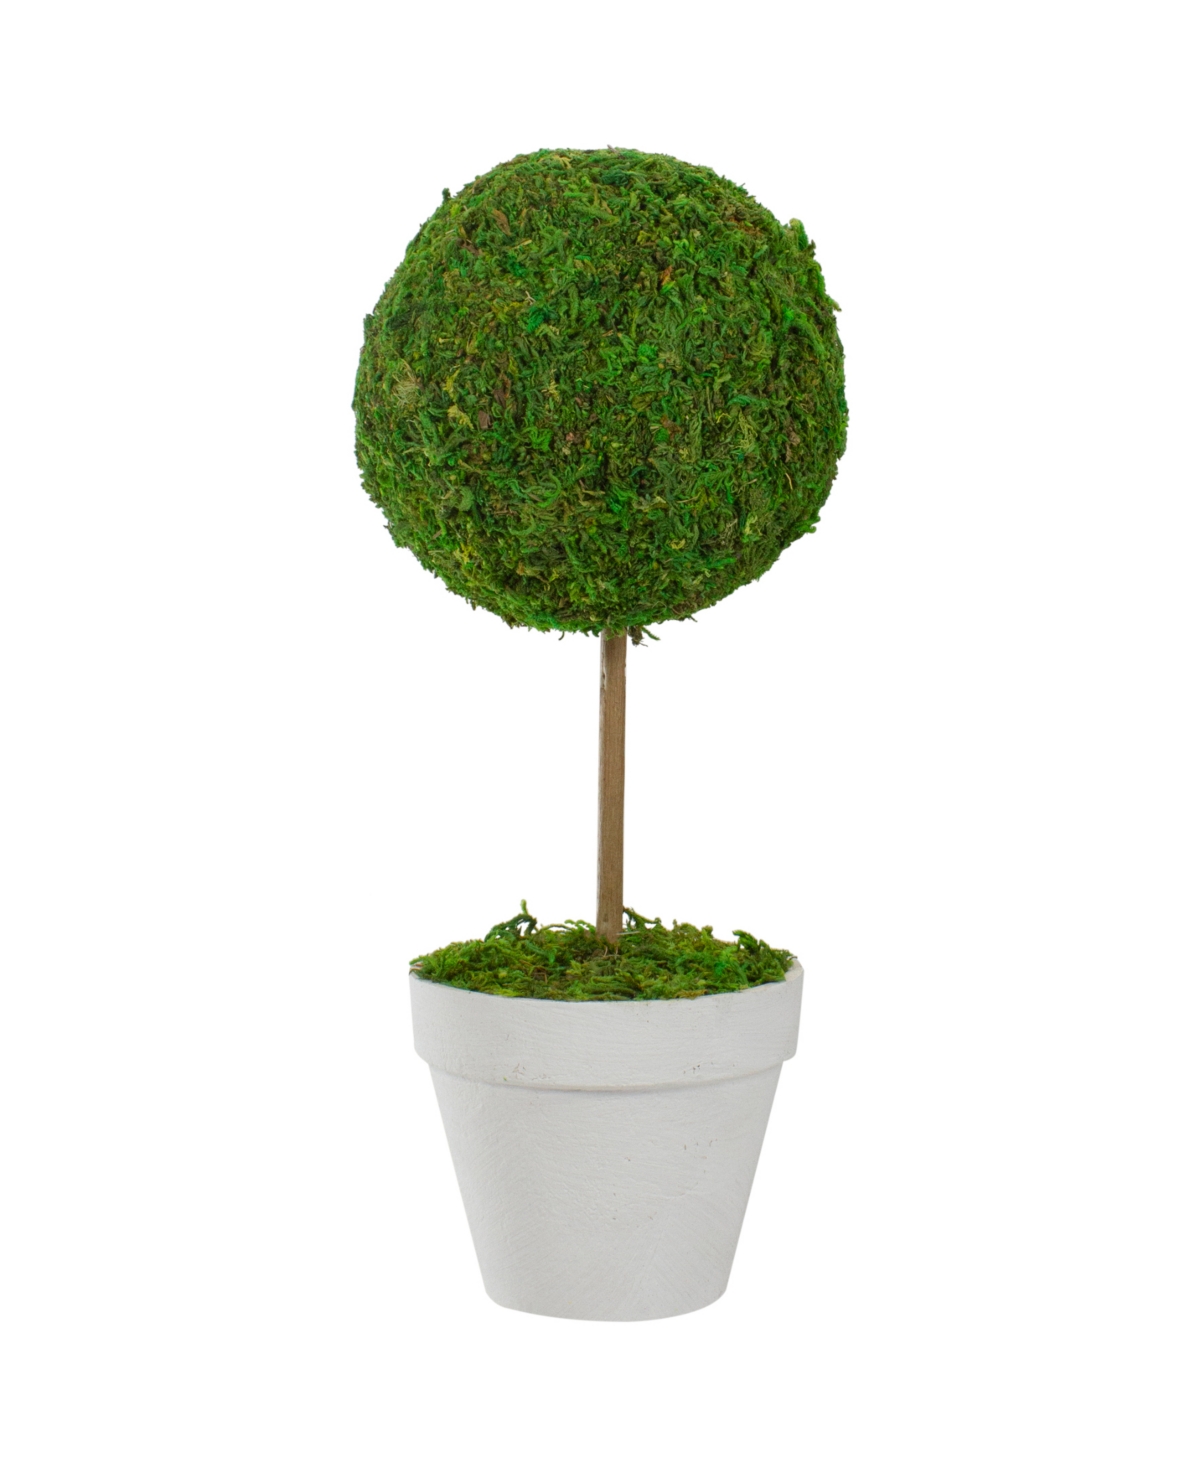 Northlight 16" Reindeer Moss Ball Potted Artificial Spring Topiary Tree In Green